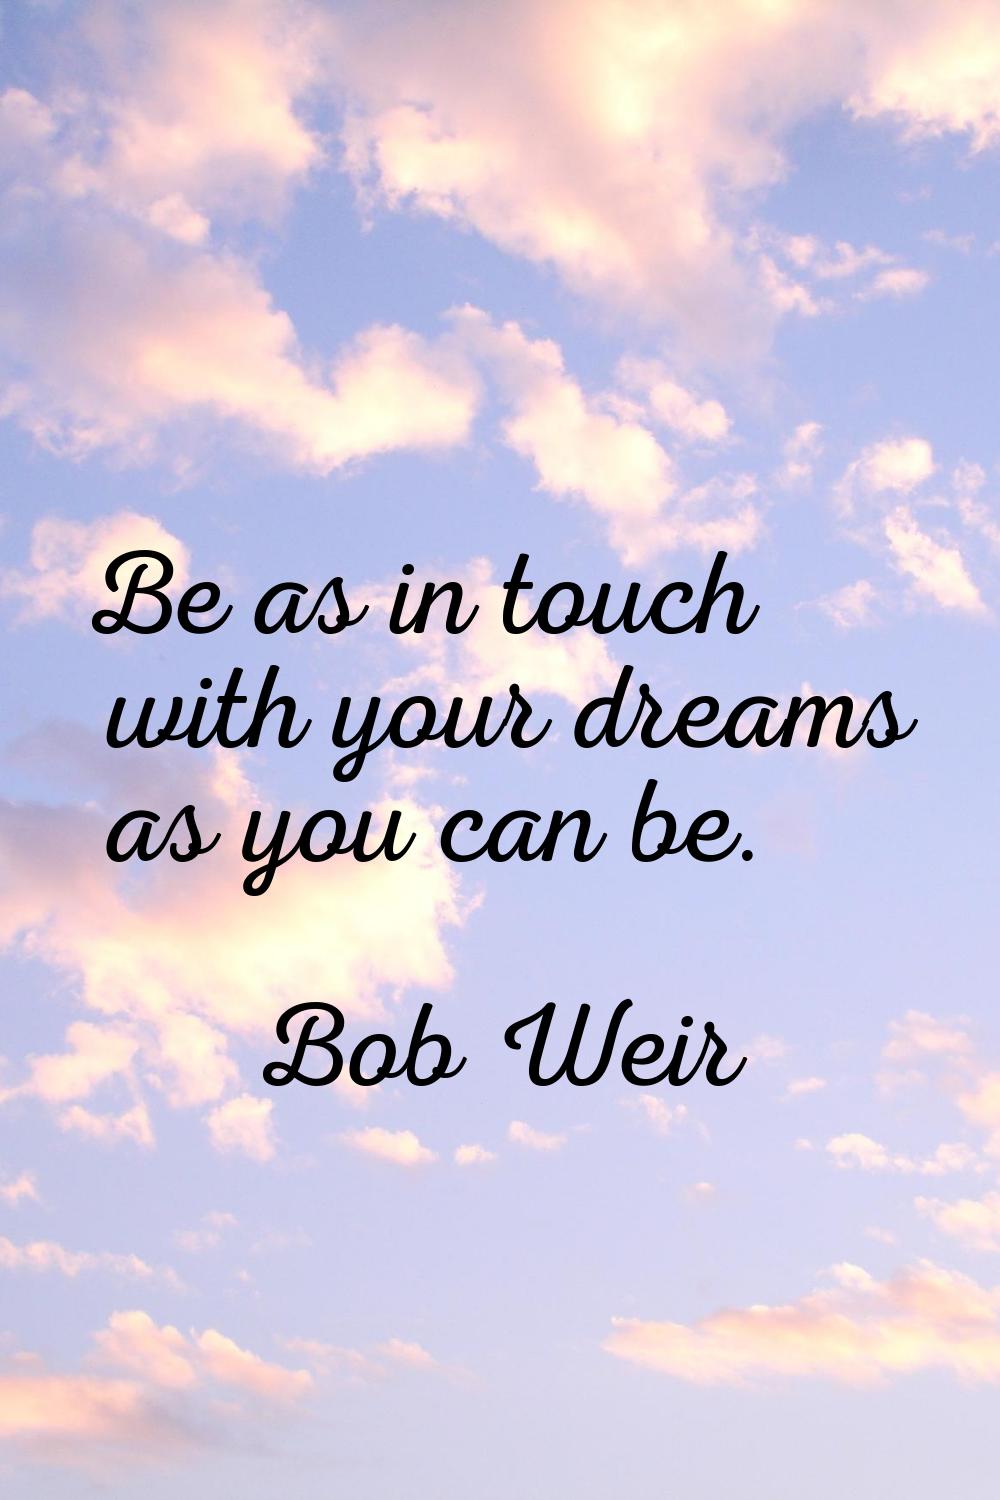 Be as in touch with your dreams as you can be.